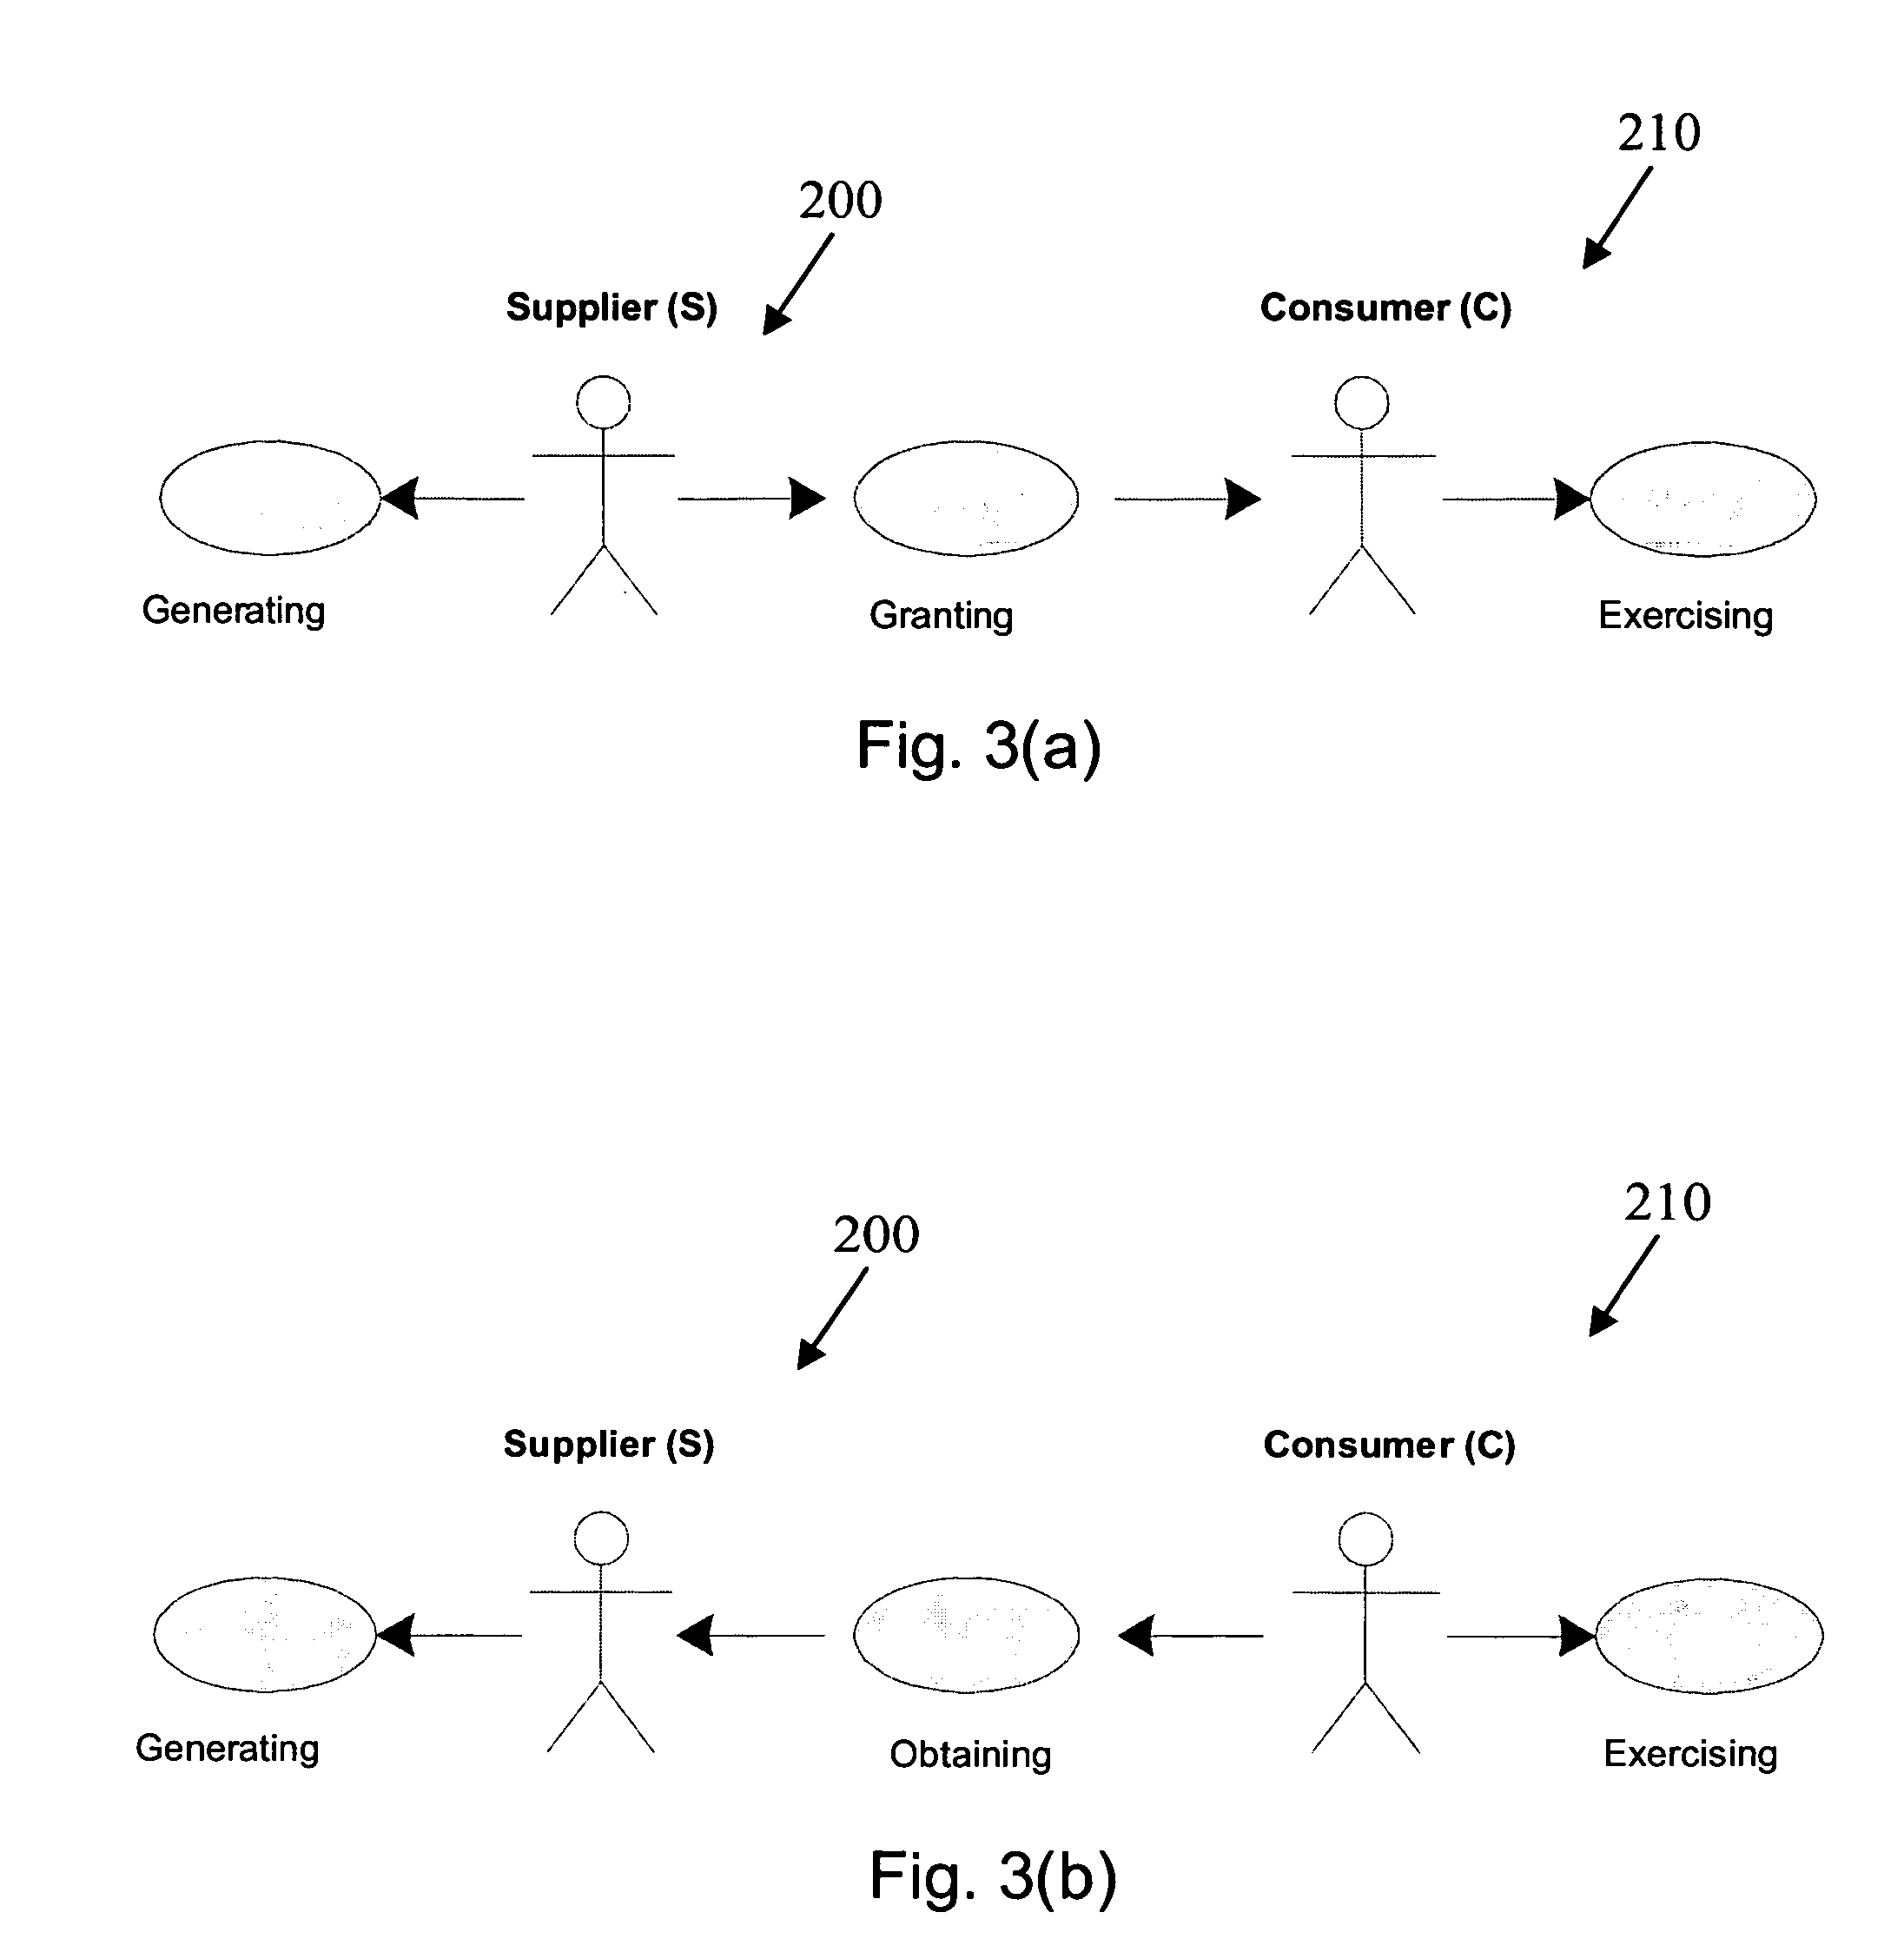 System and method for rights offering and granting using shared state variables